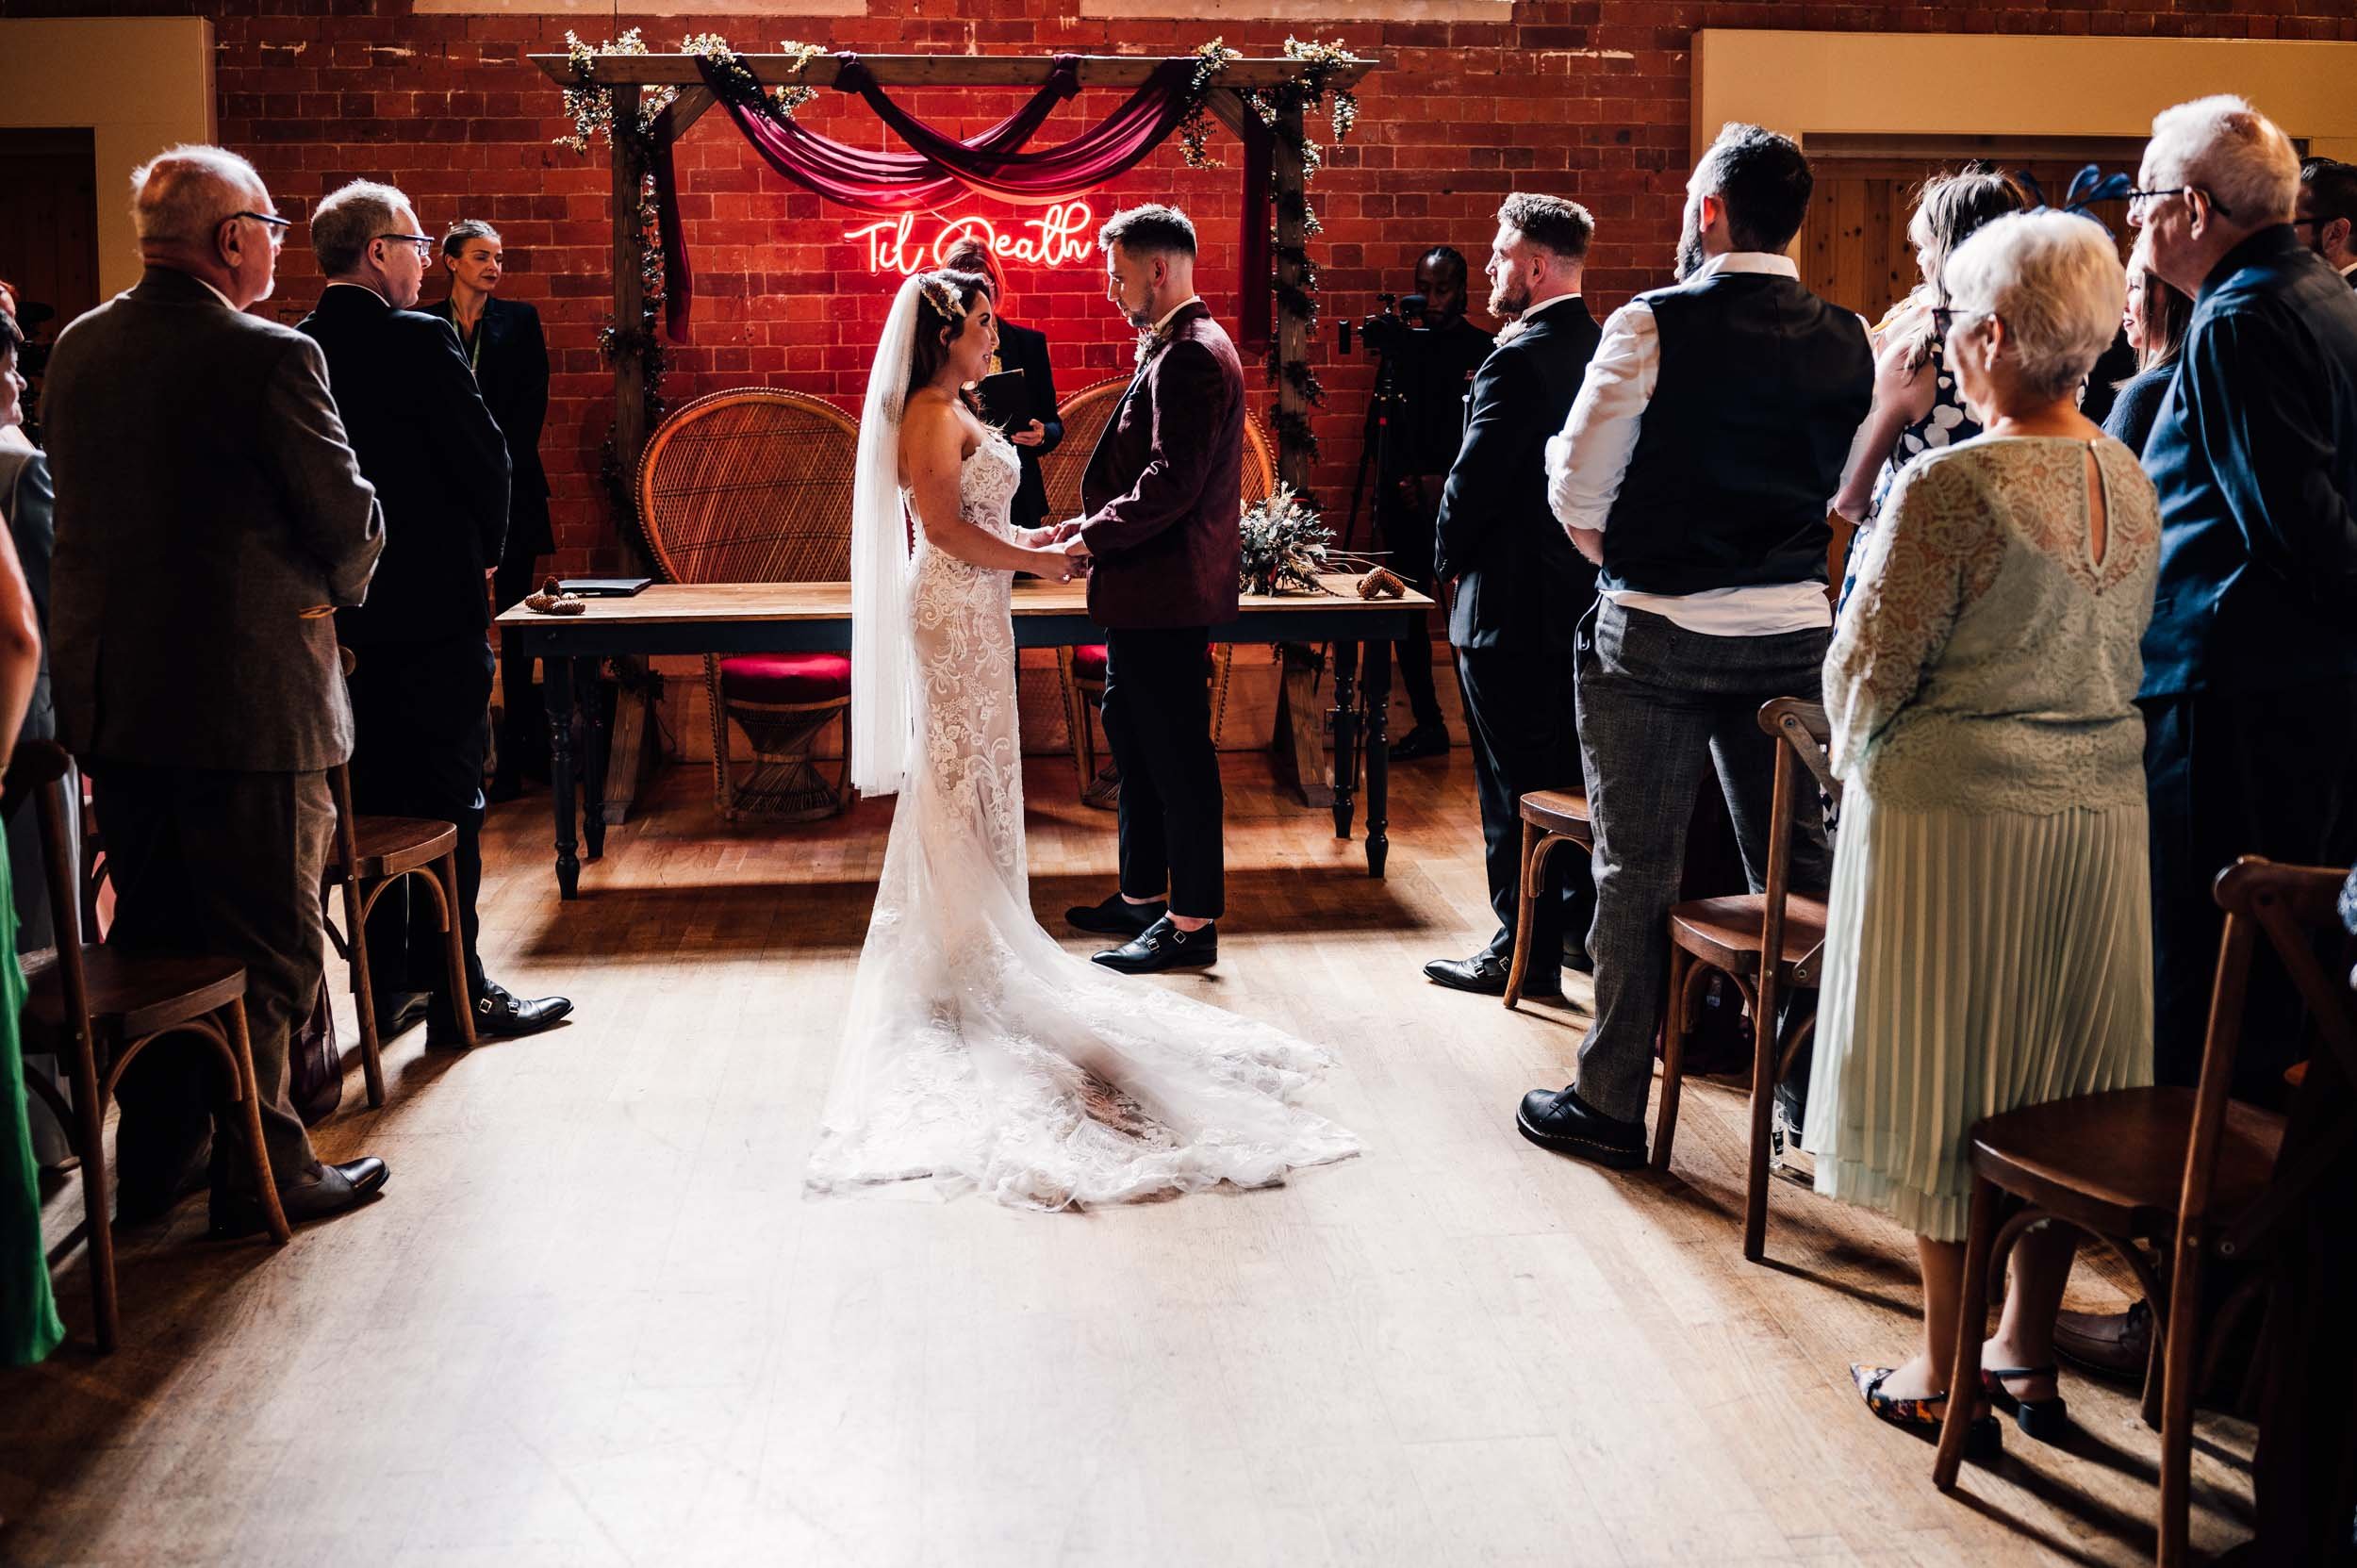 bride and groom getting married at Thoresby Riding Hall